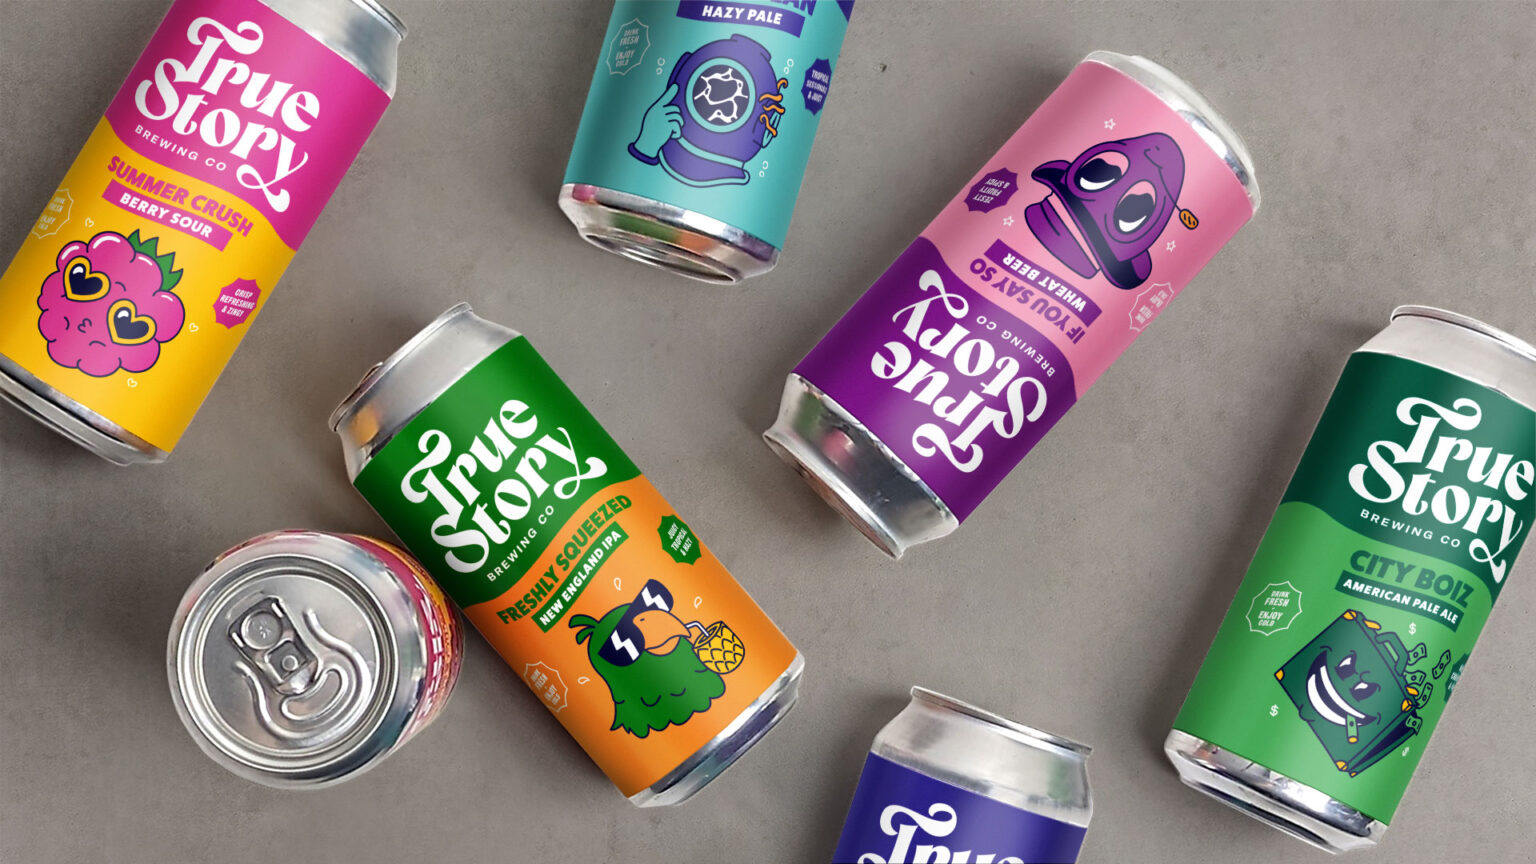 True Story Brewing Co. Packaging Design